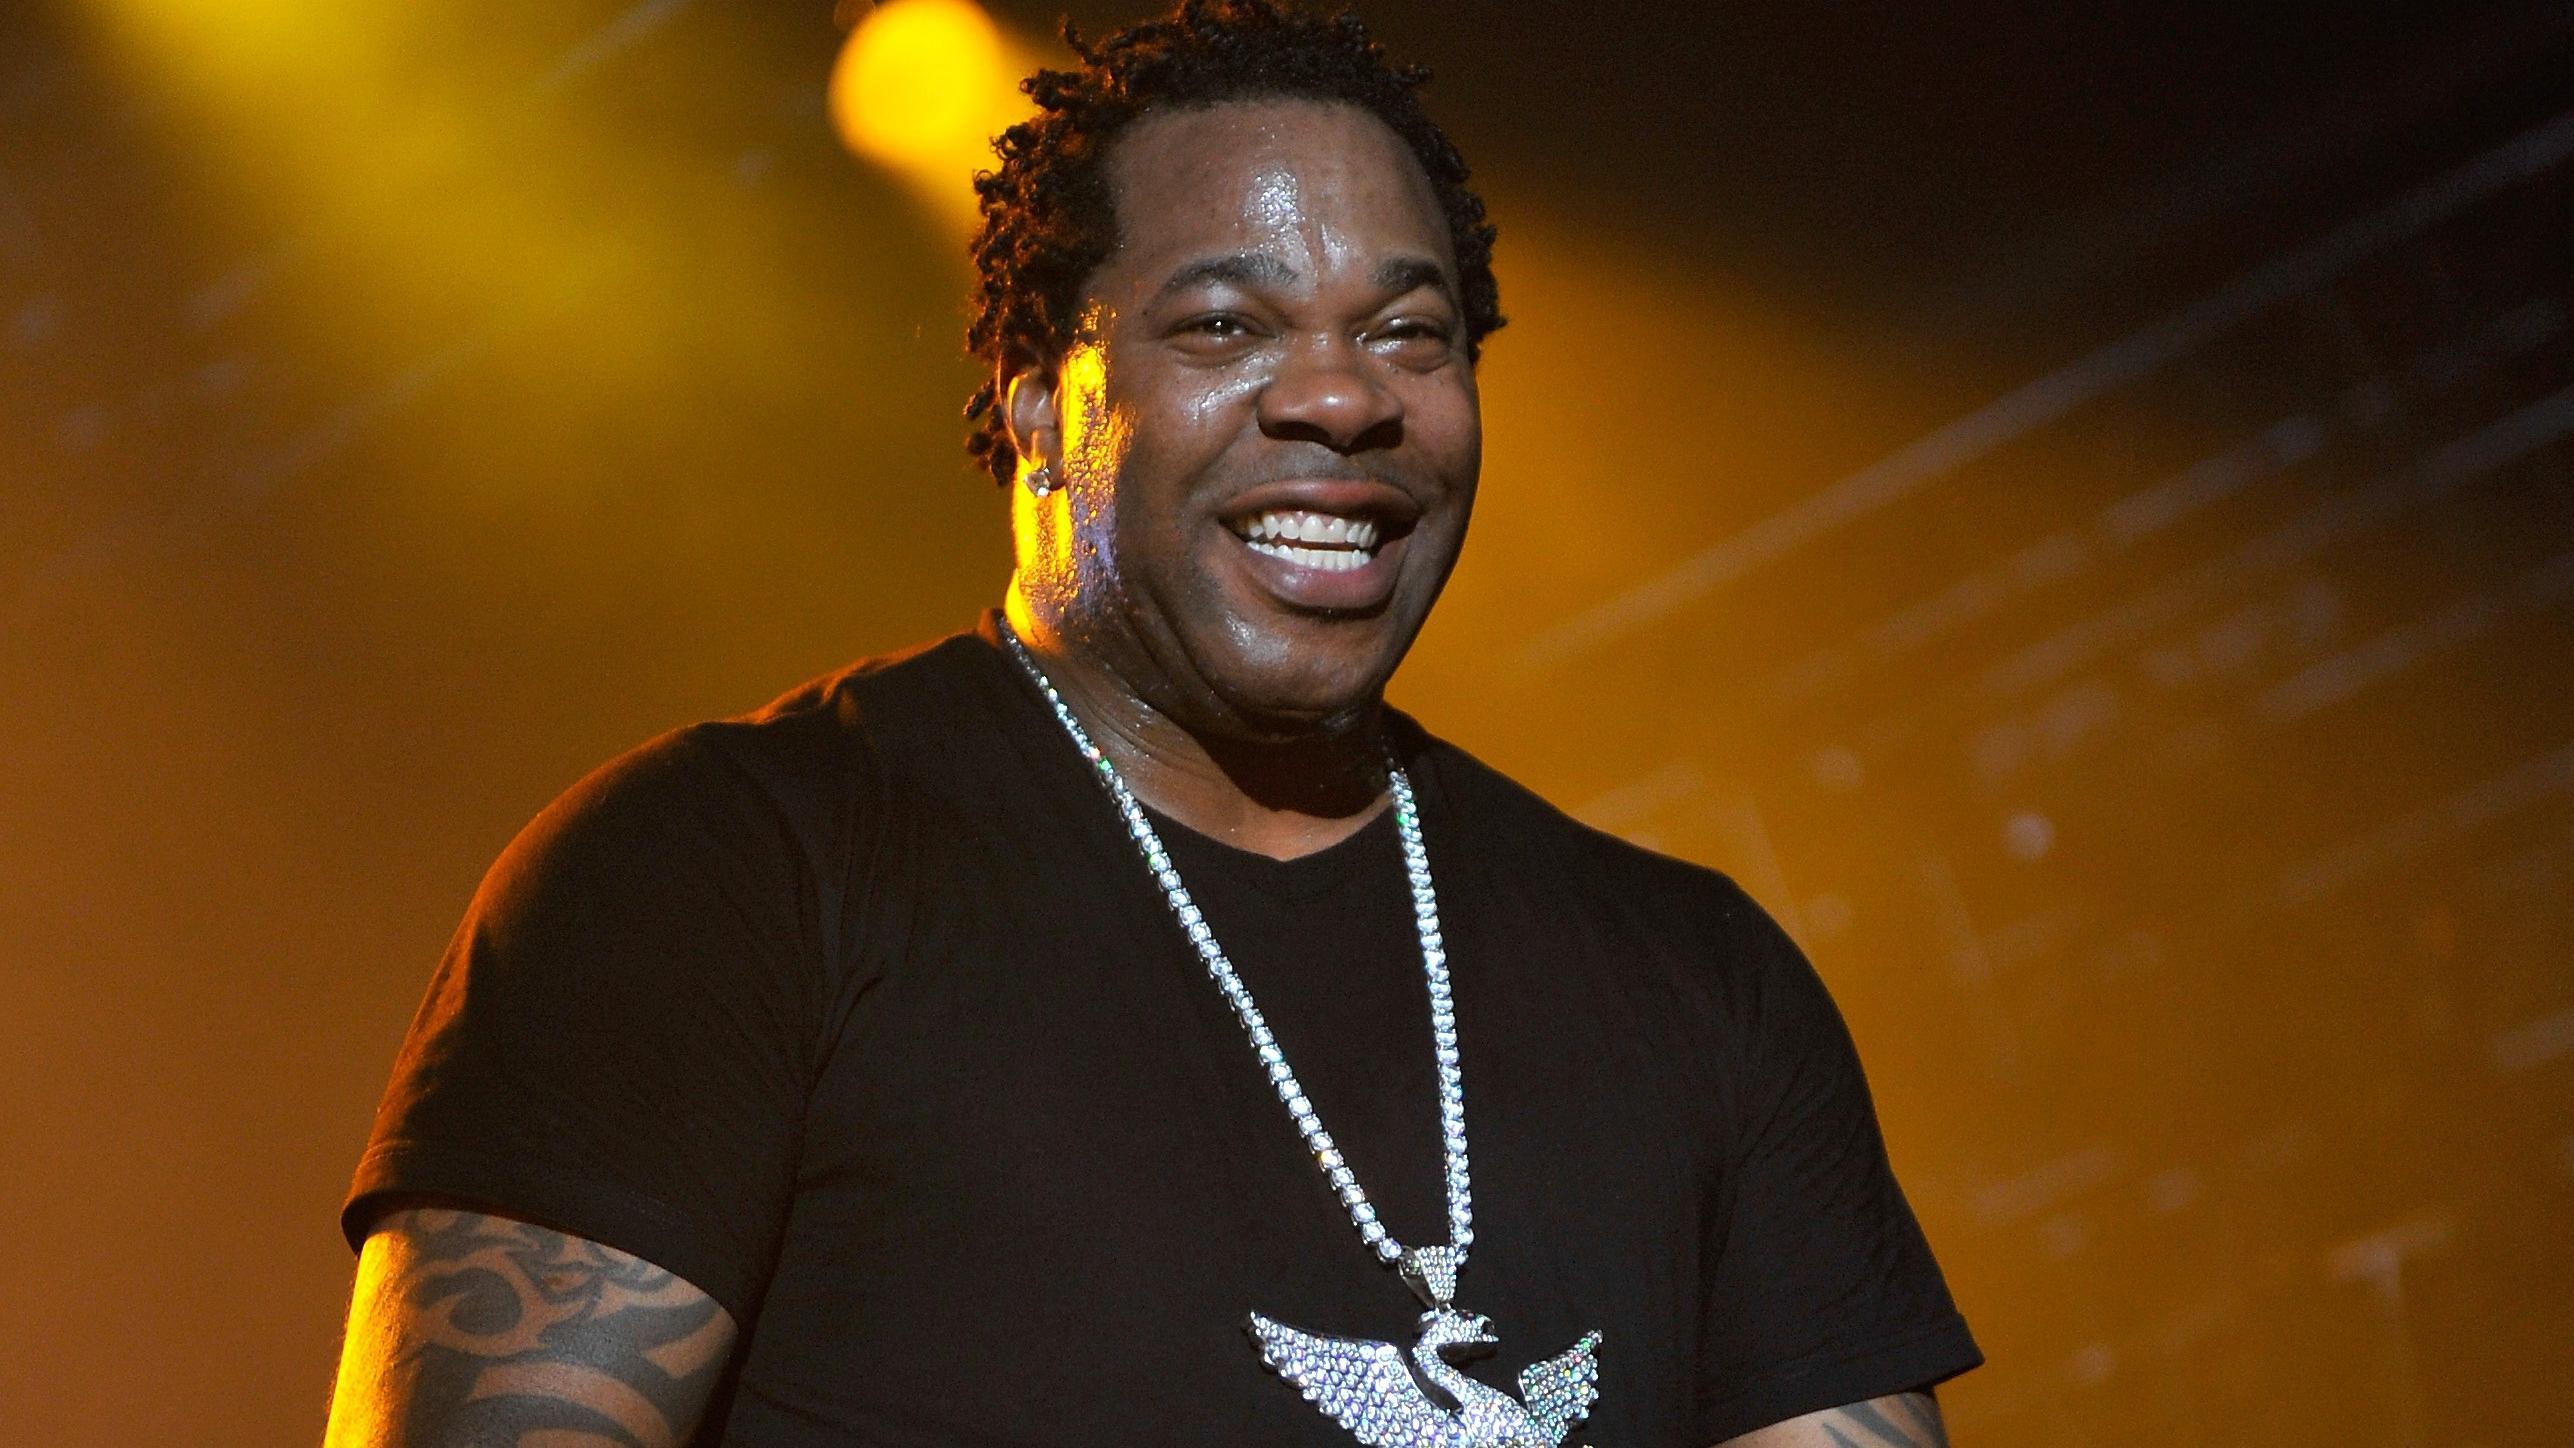 Busta Rhymes Wallpaper Image Photo Picture Background